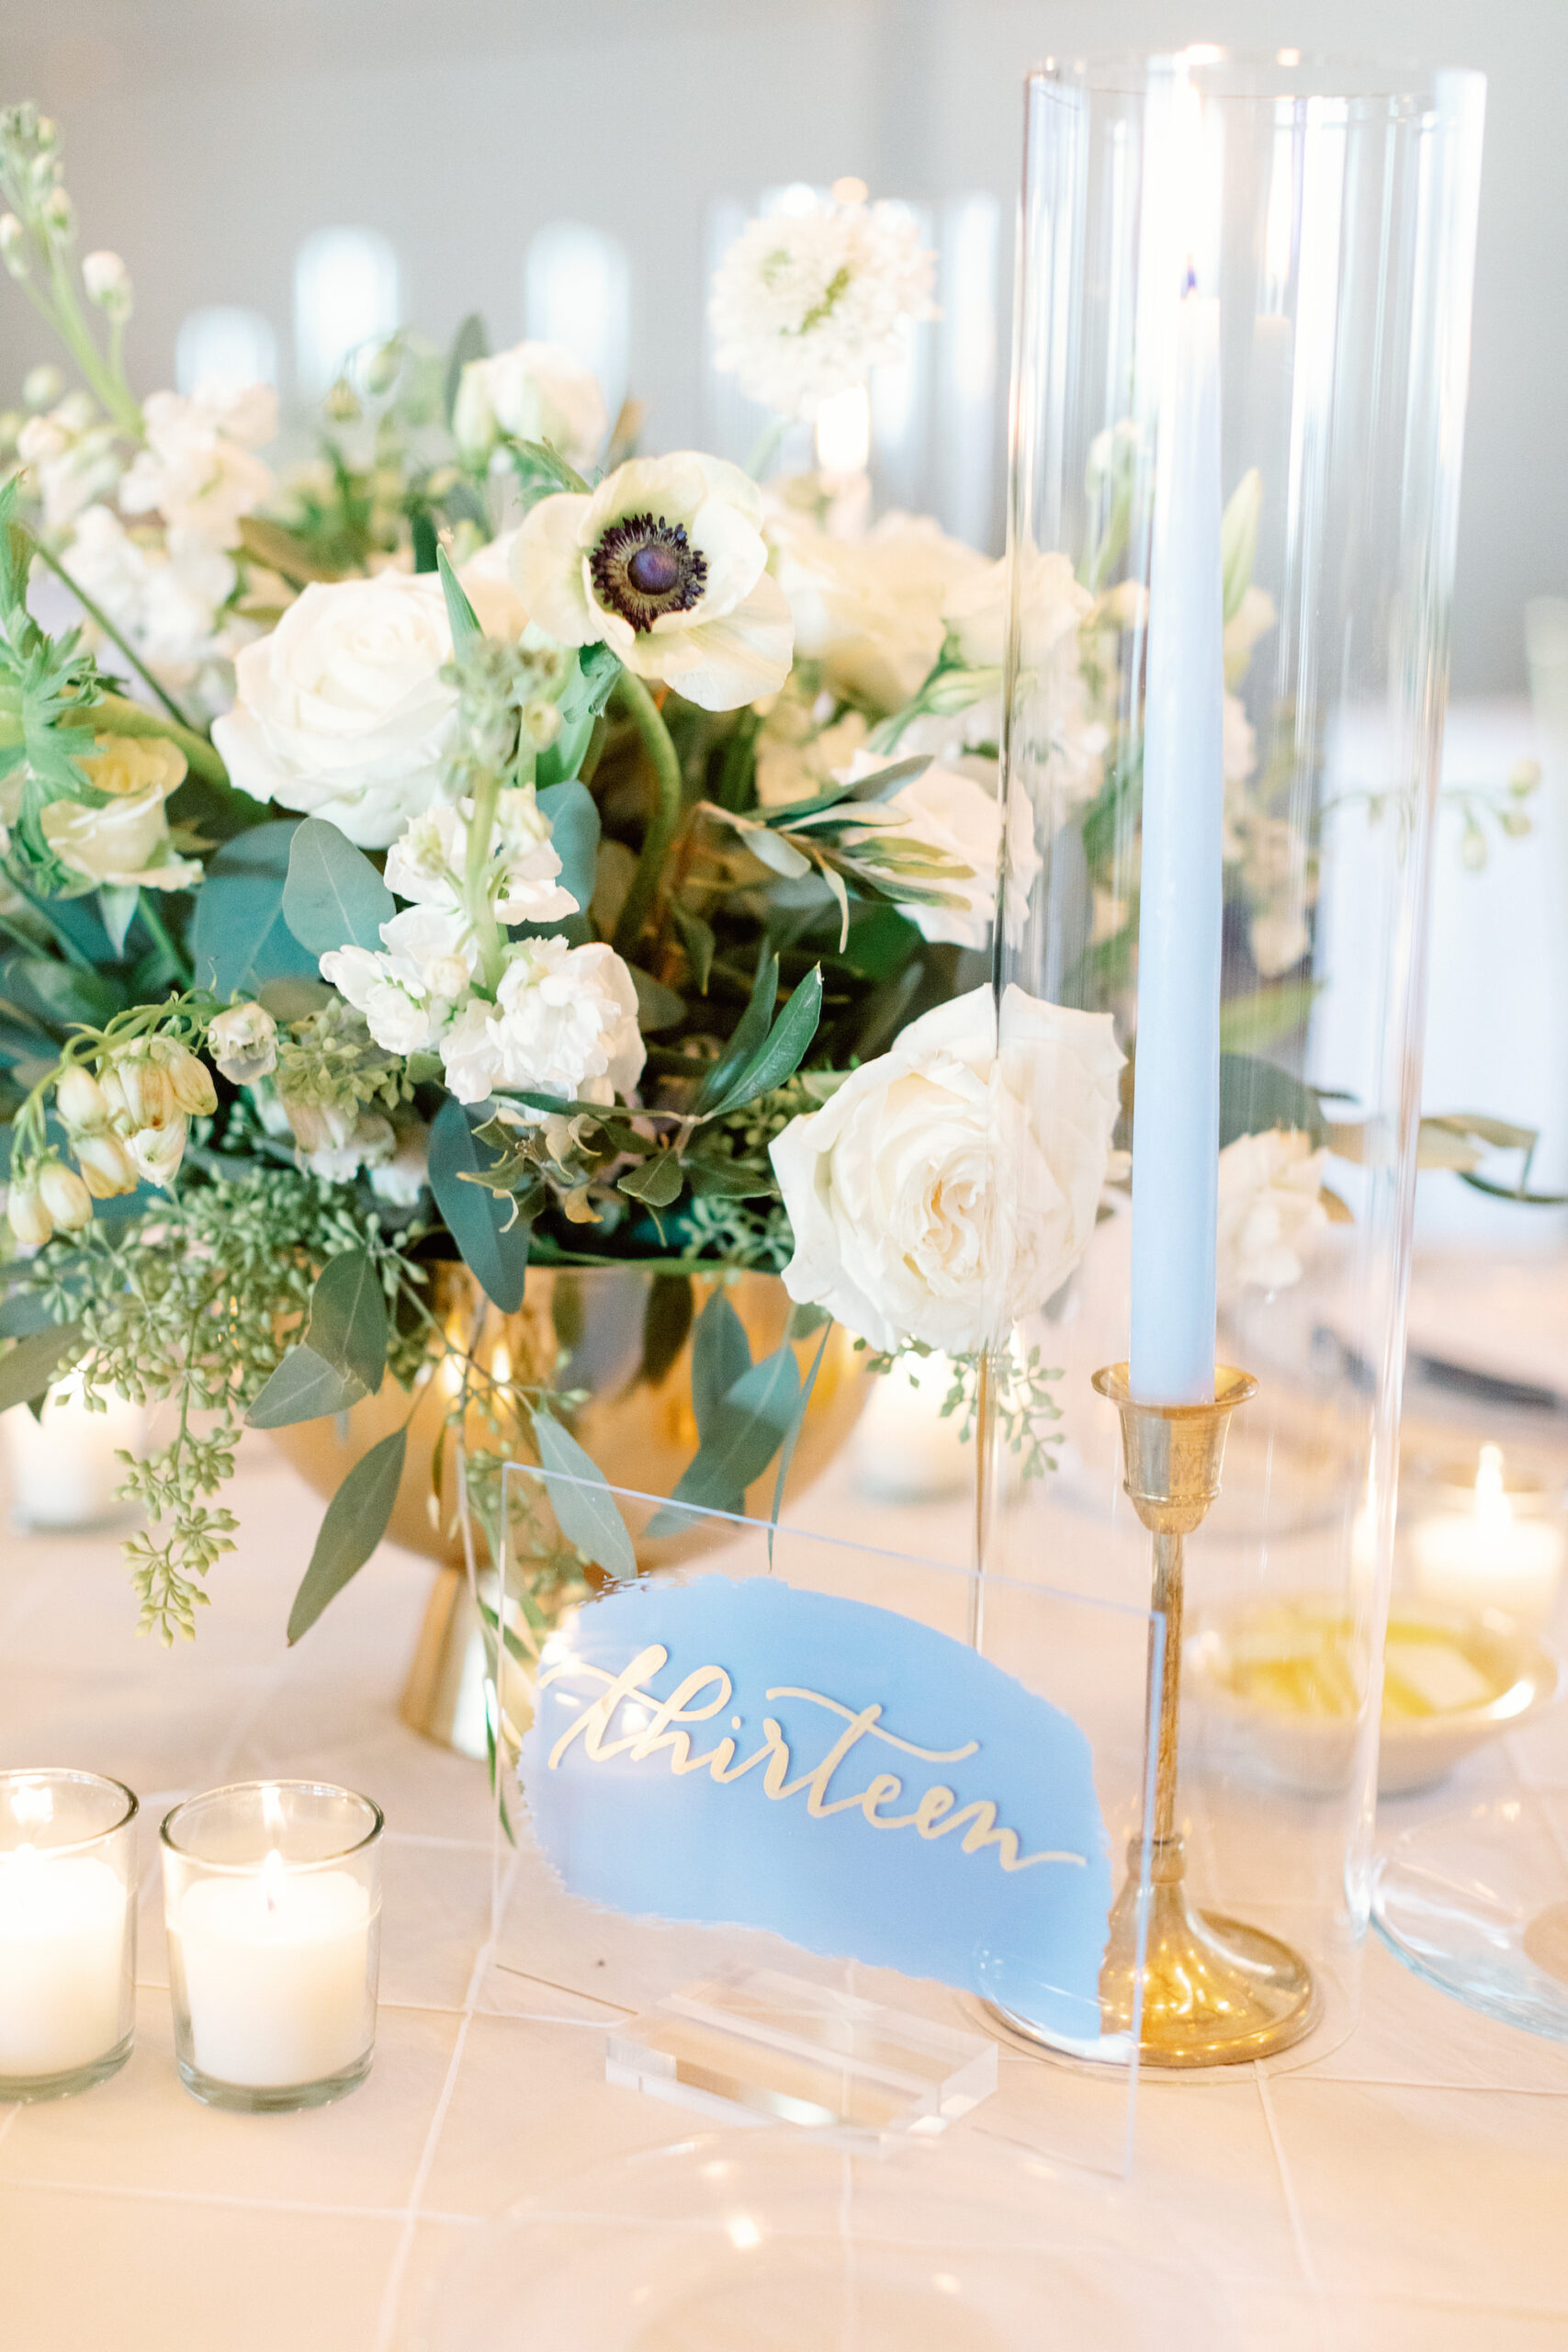 Blue Taper Candle with Painted Acrylic Wedding Reception Name Place Cards and Gold Decor with White Centerpieces | Elegant Reception Inspiration | Florist Botanica International Design Studio